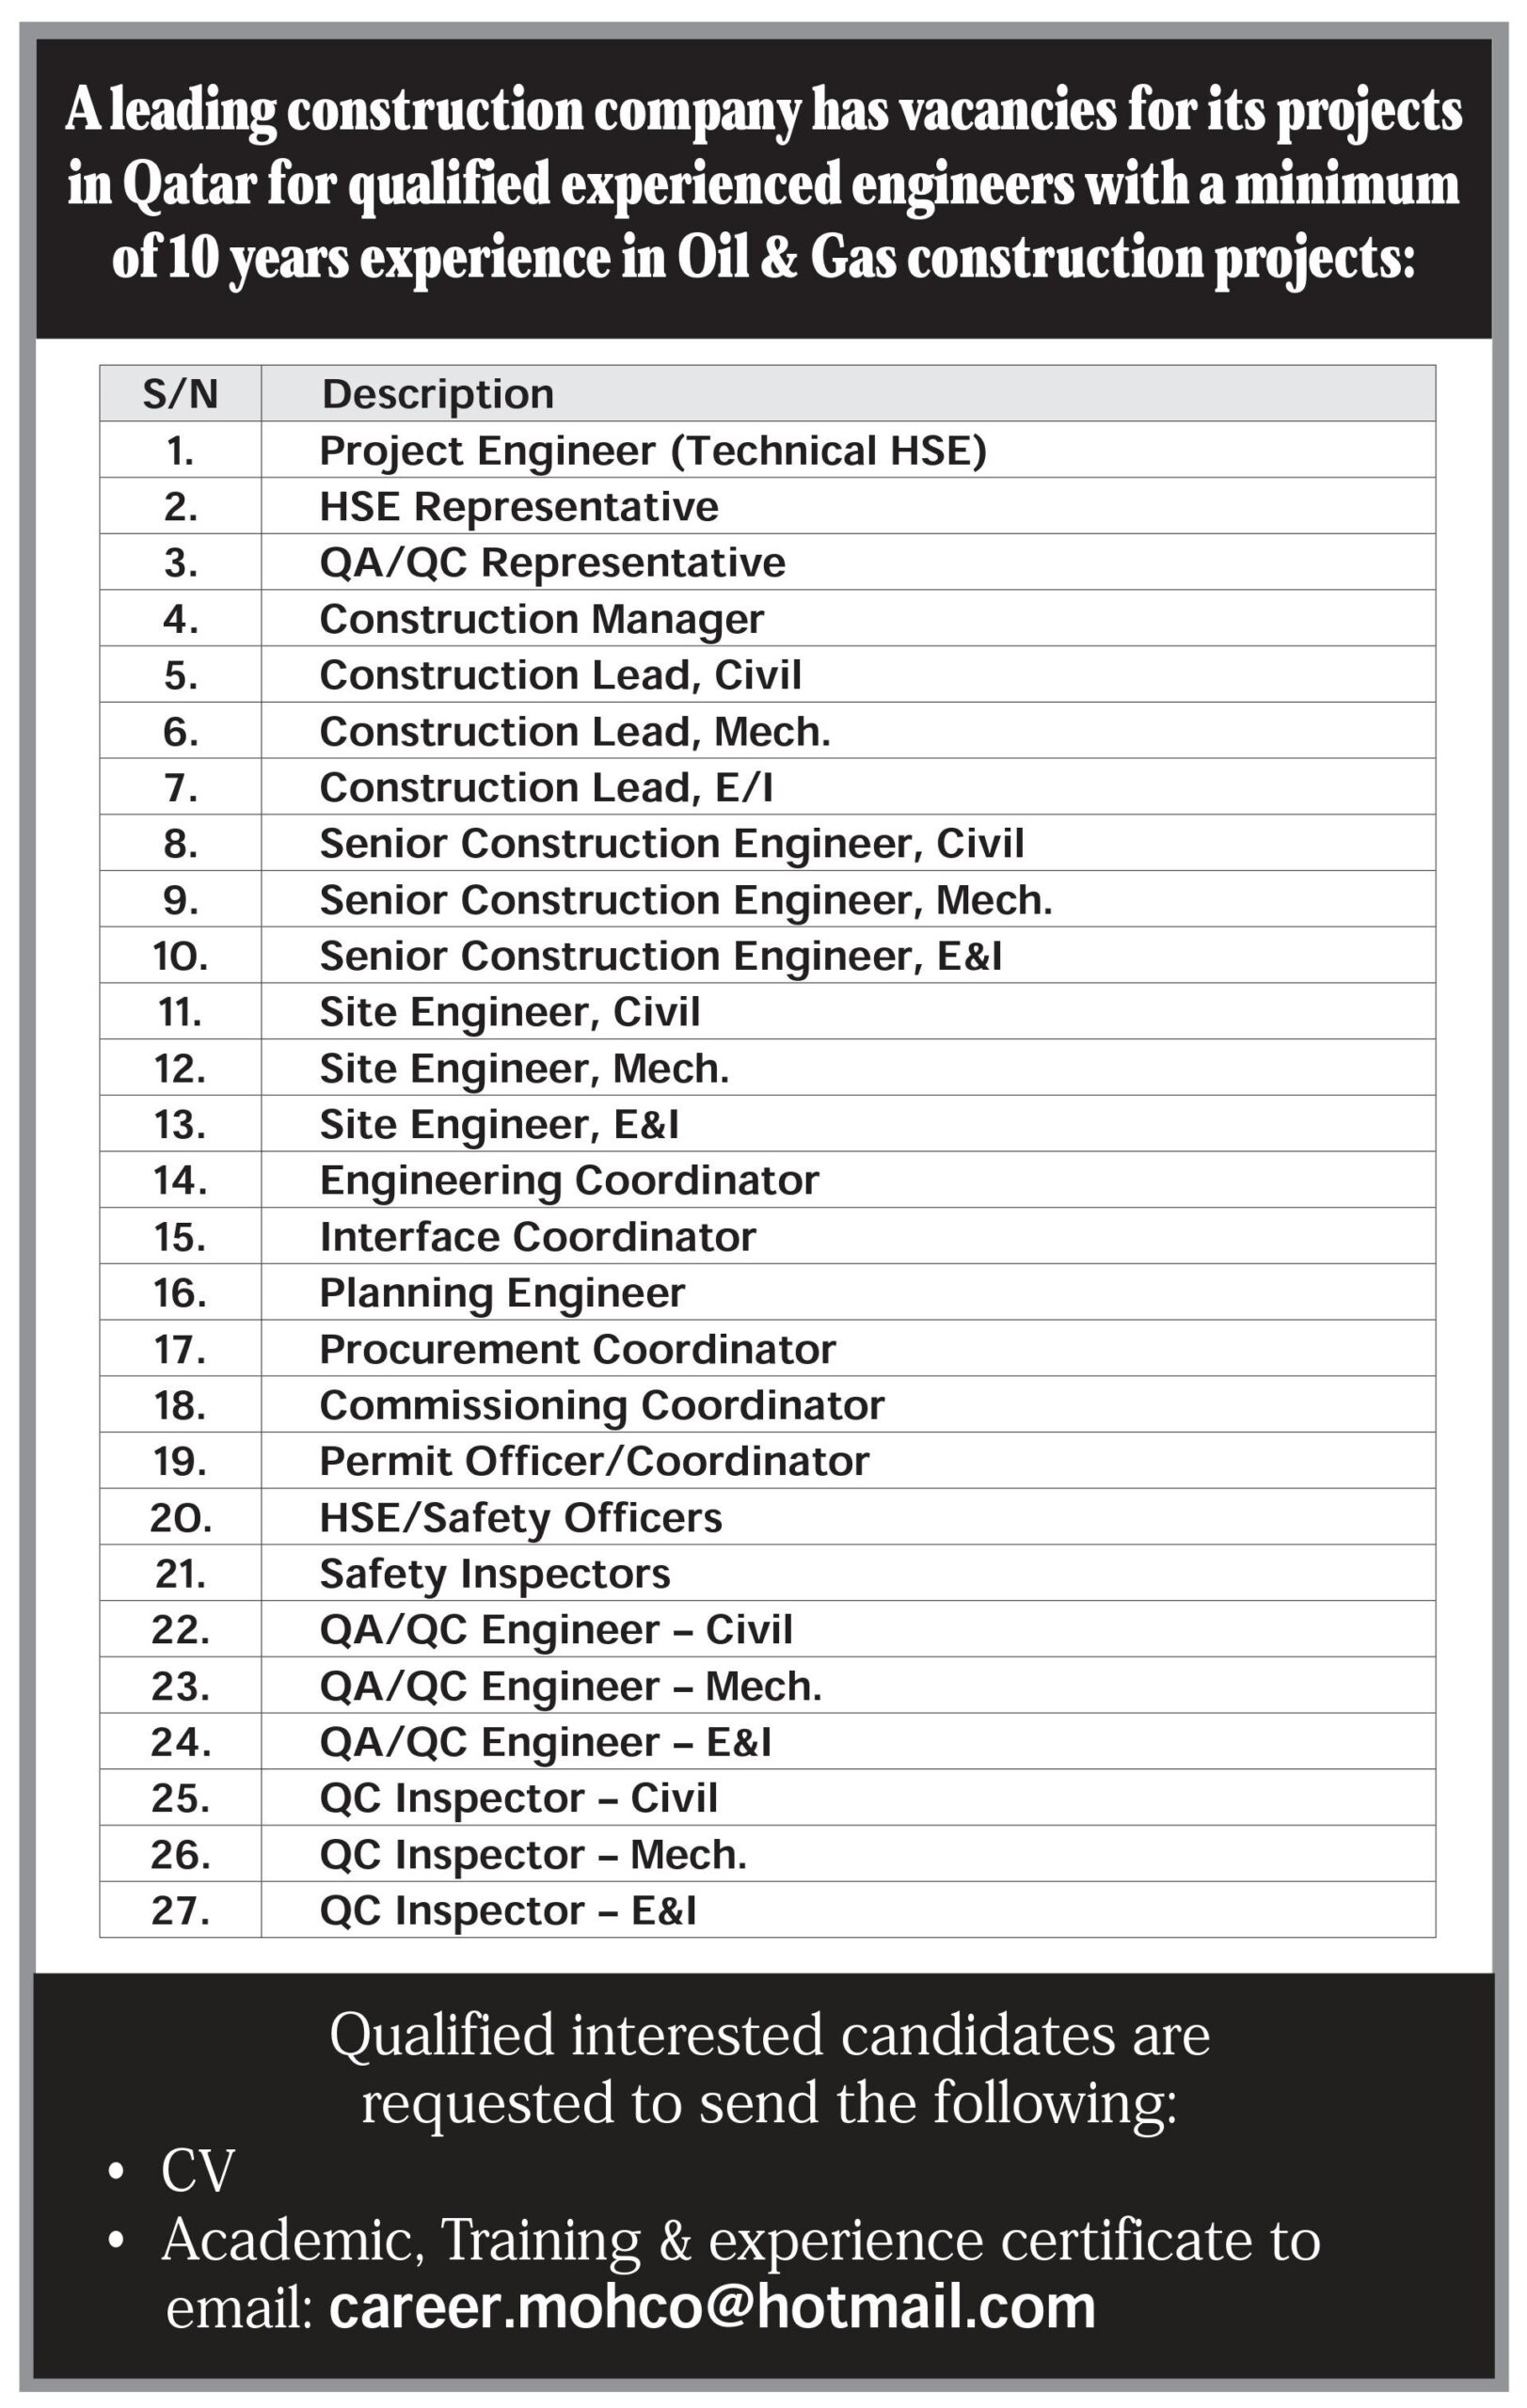 A leading construction company has vacancies for its projects in Qatar